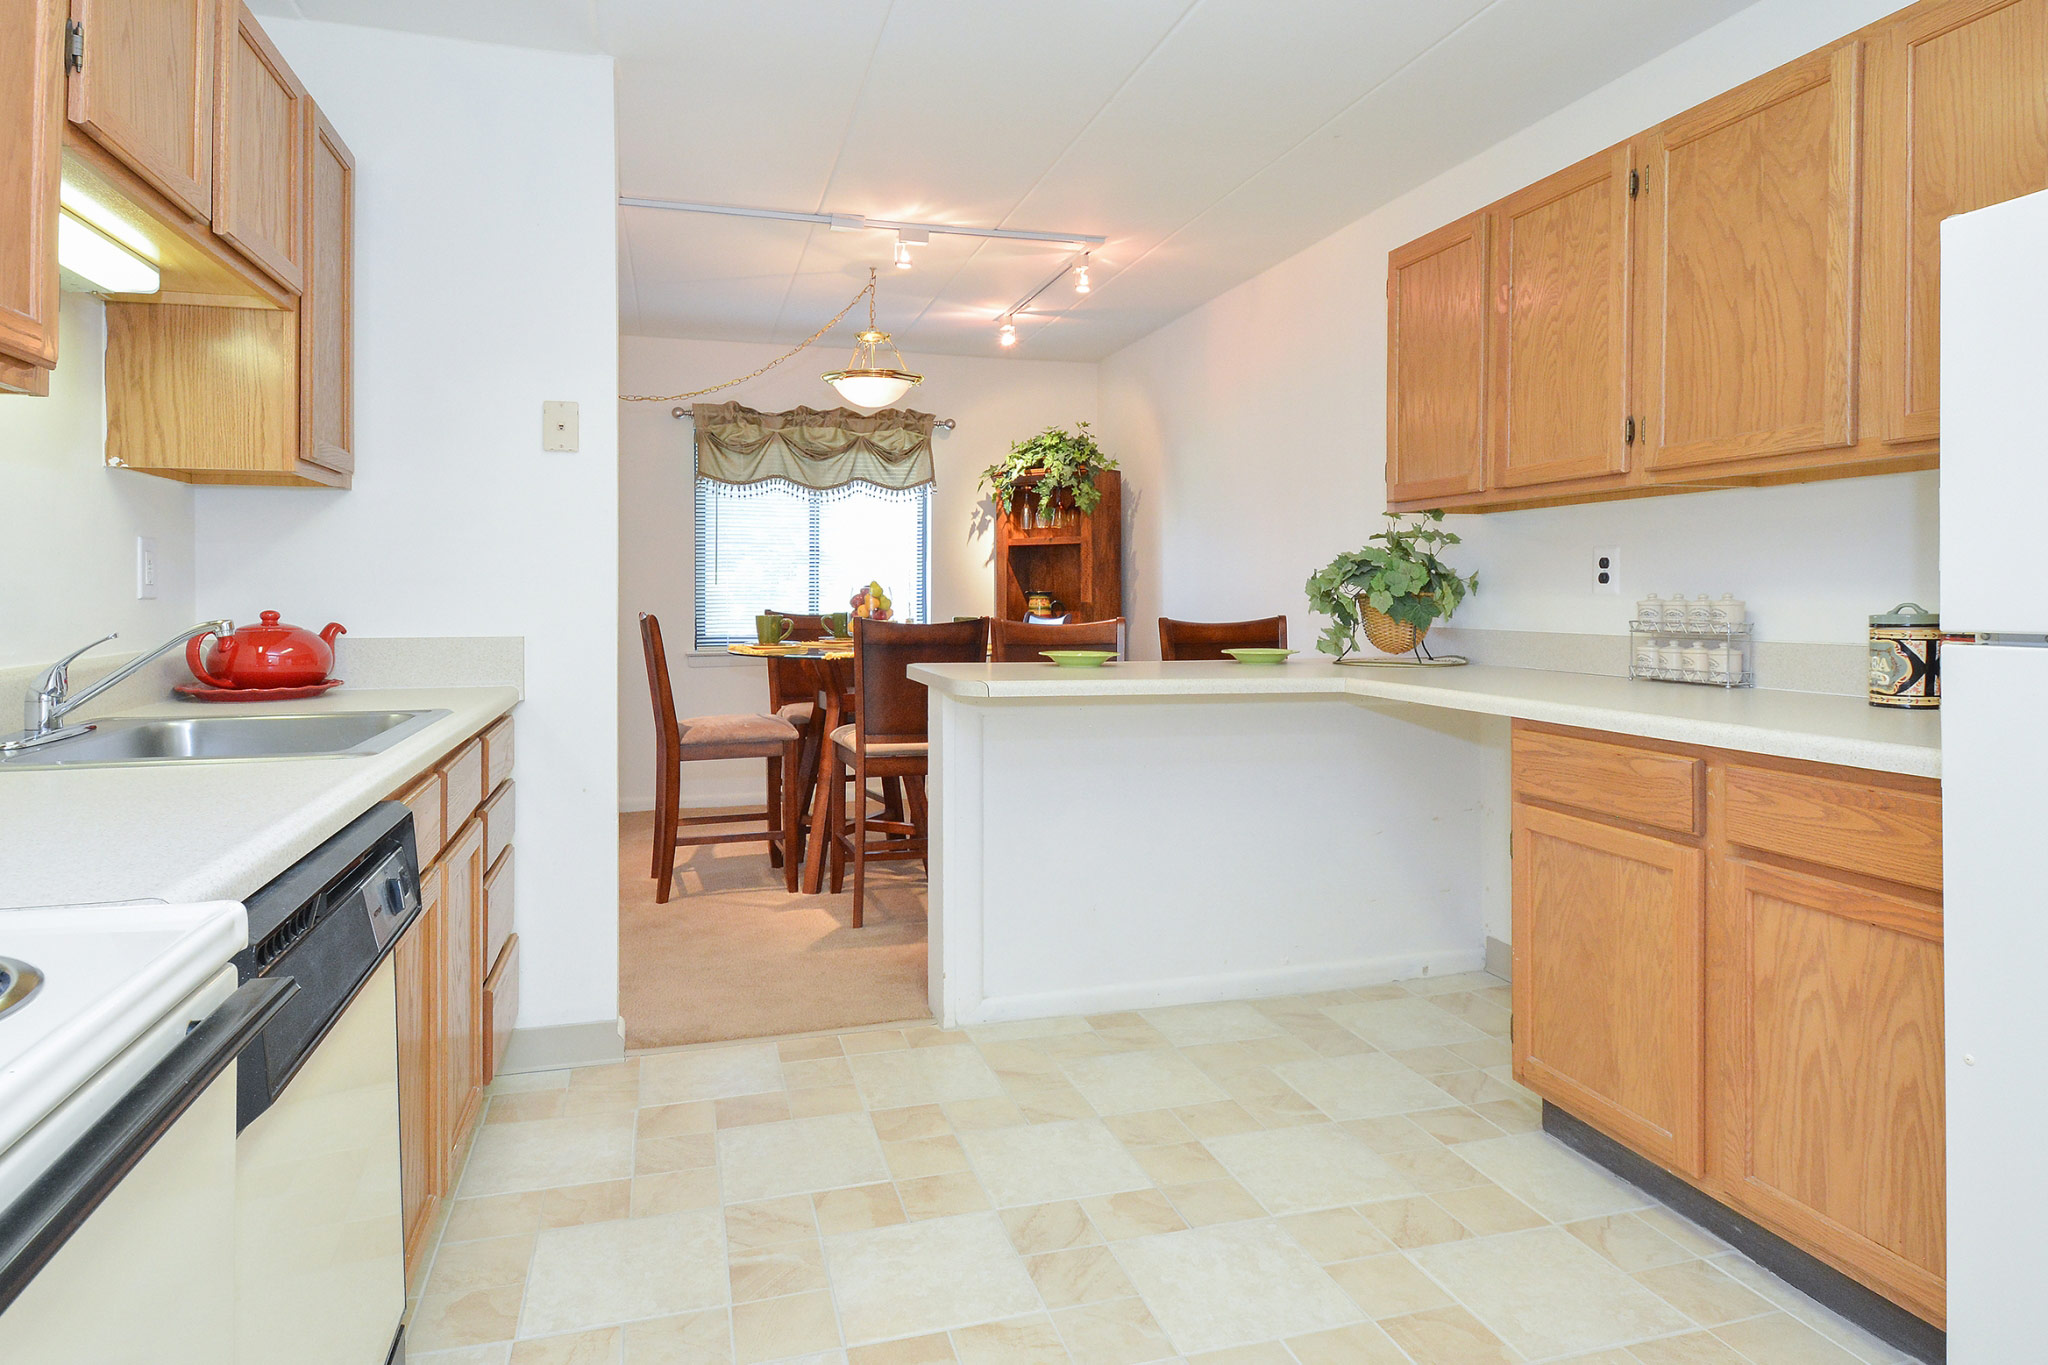 Kitchen area of an apartment, fitted with tiled flooring, a stove, a dishwasher, and a walkway to the dining area